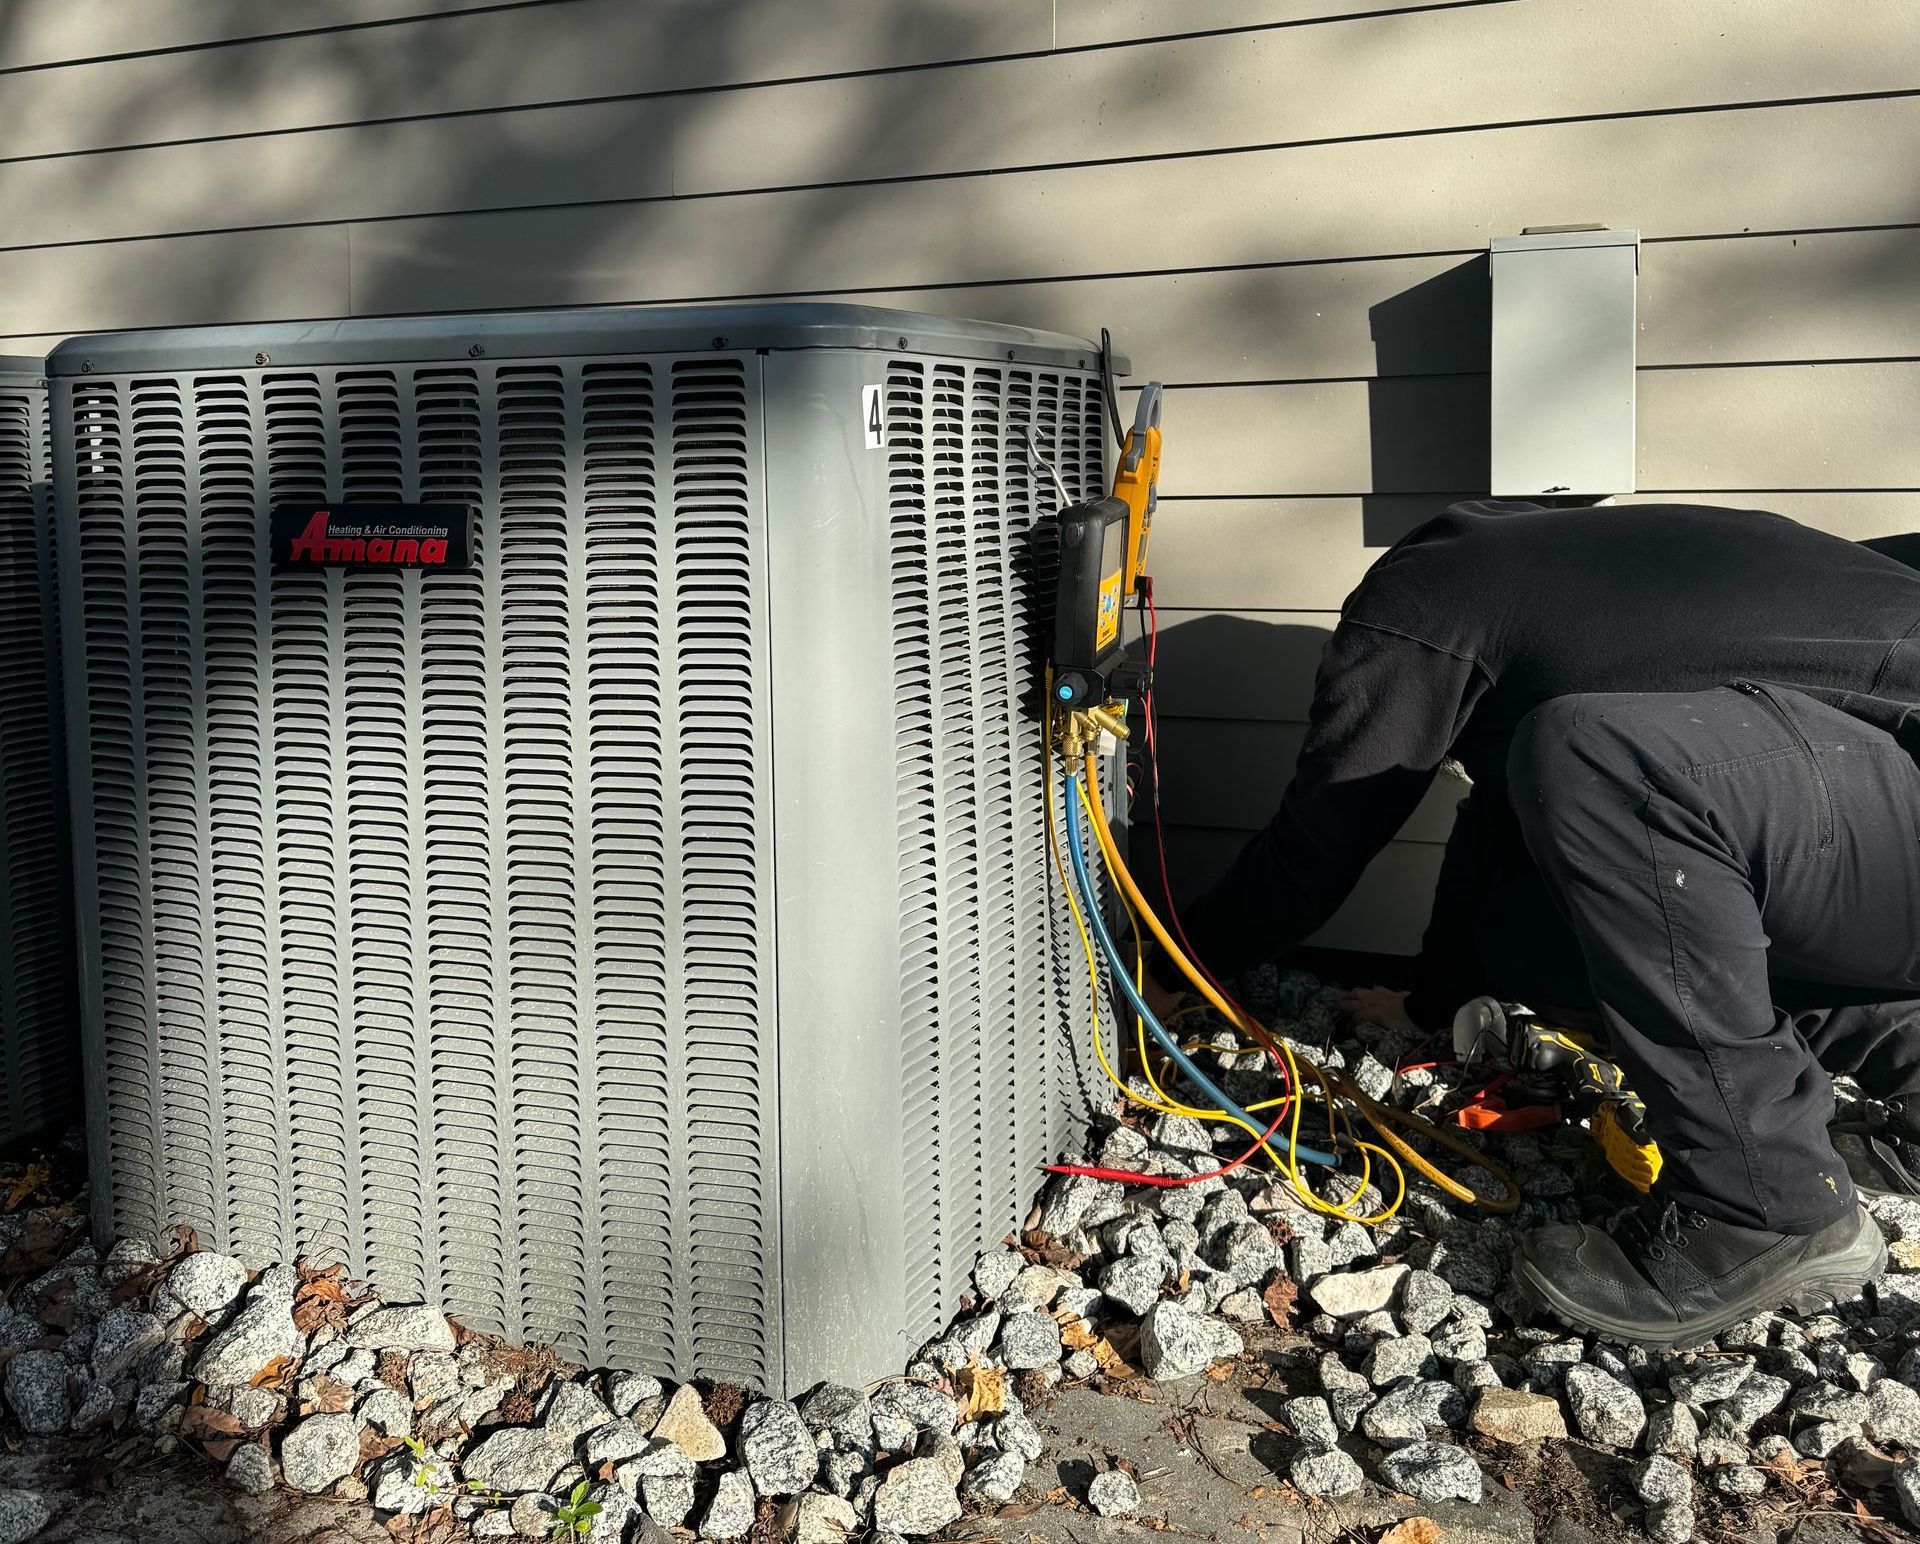 A man is working on an air conditioner outside of a house.